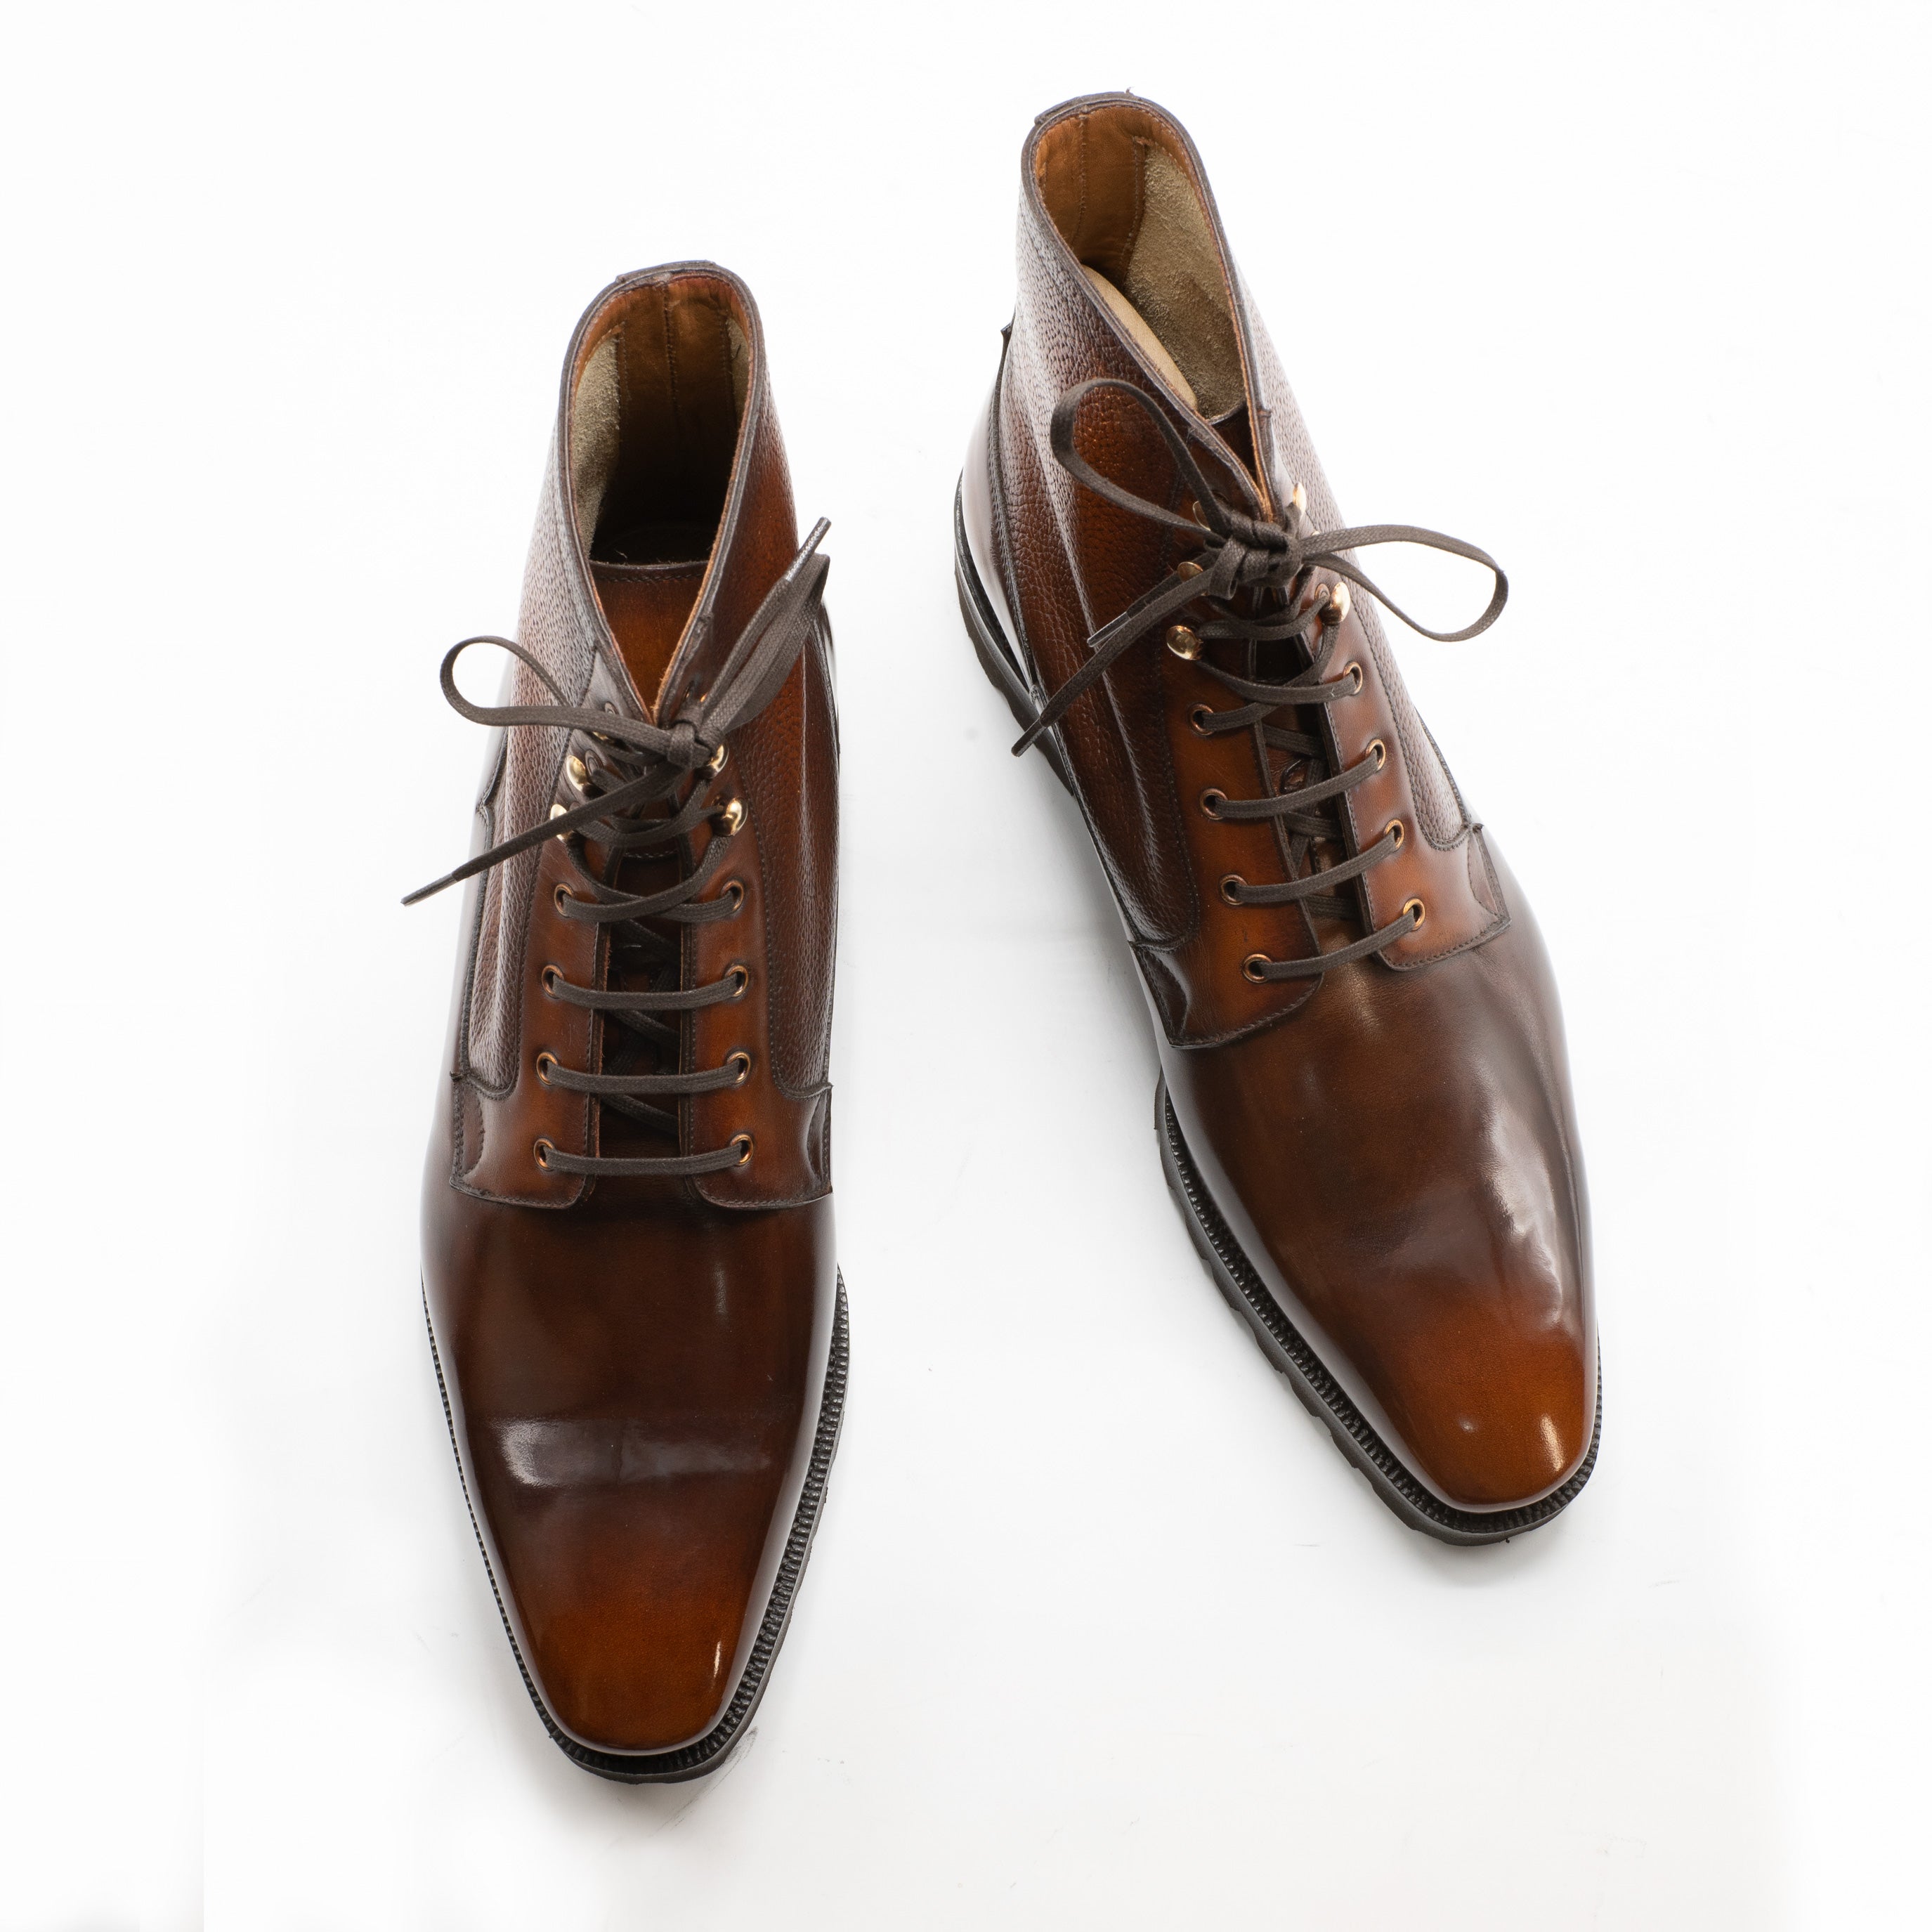 Roy Balmoral Derby Boot by Norman Vilalta Bespoke Shoemakers